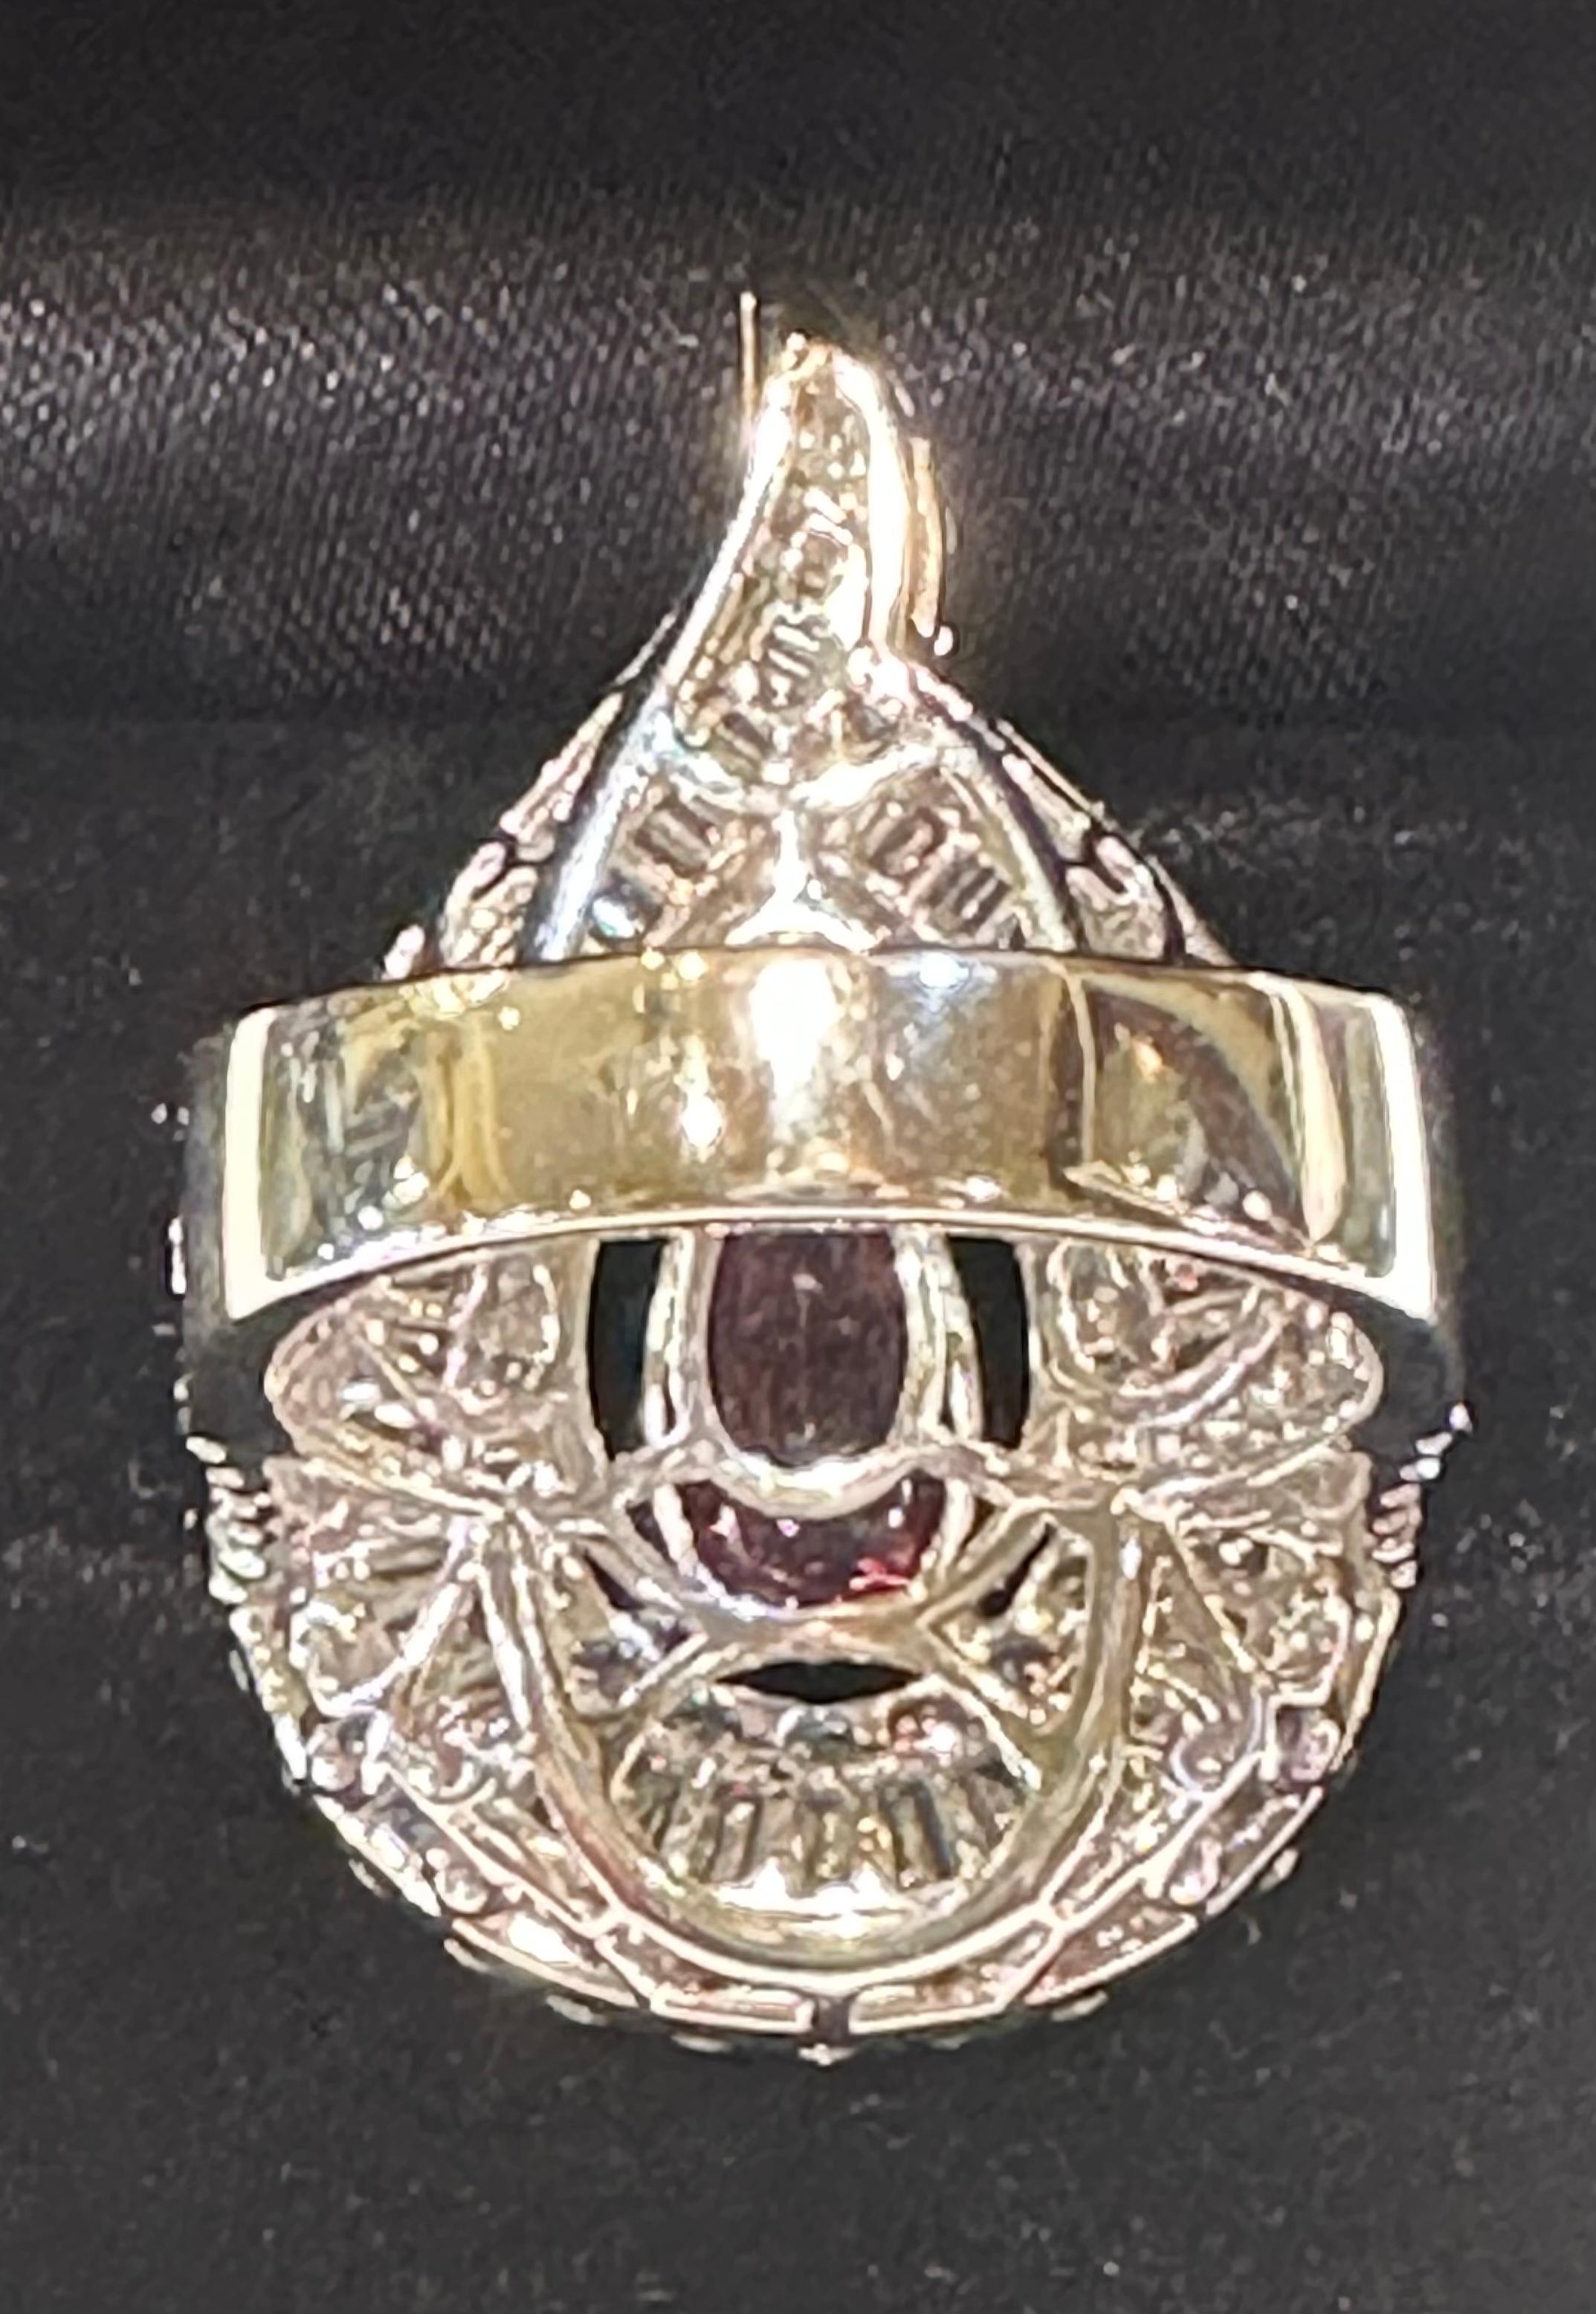 Ravishing Rubellite & Diamond Tear Drop Pear Shaped 18K White Gold Cocktail Ring In Excellent Condition For Sale In Tustin, CA